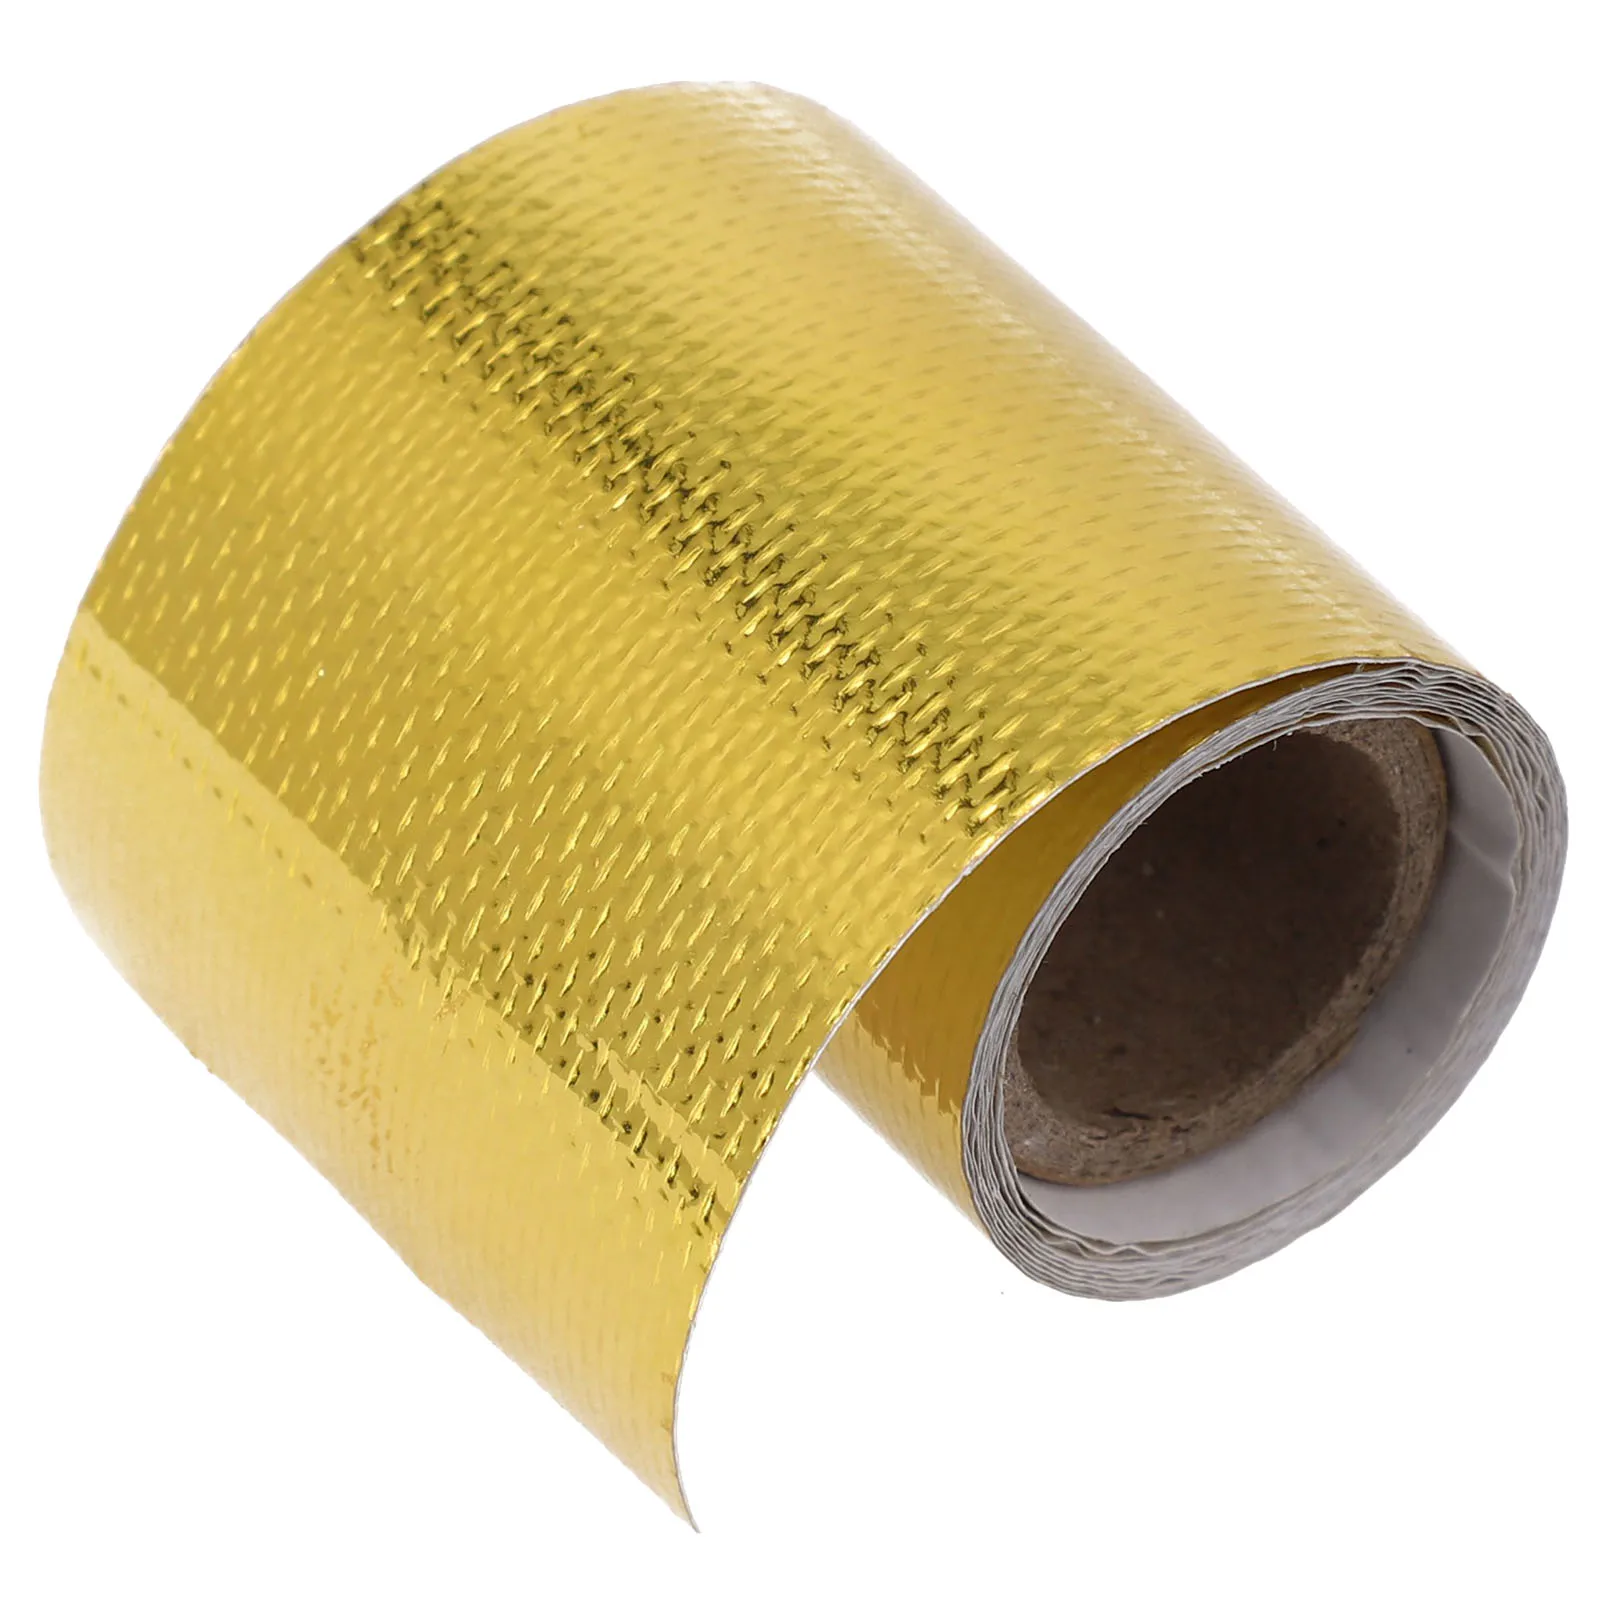 

Gold Thermal Exhaust Tape Air Intake Heat Insulation Shield Wrap 100x5cm GMJJ3946 Heat Shield Wrap Tape For Motorcycle Exhaust